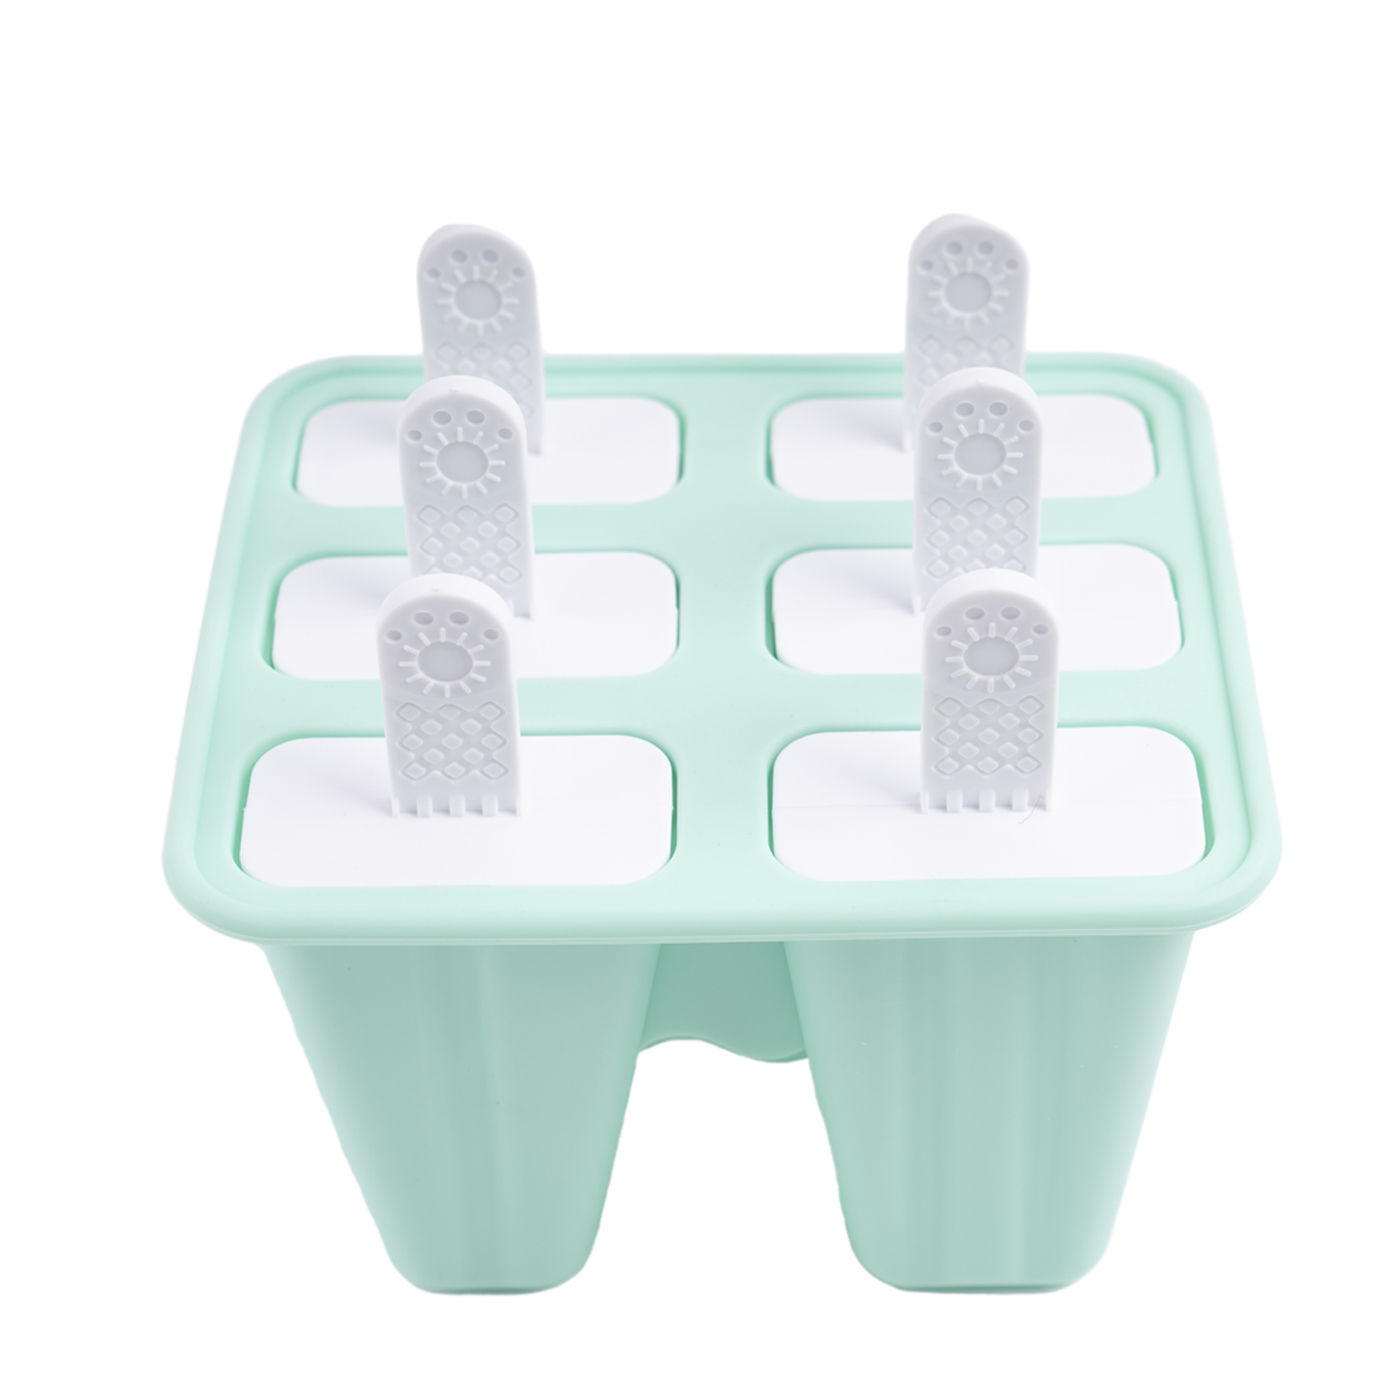 6 Grid Popsicle Mold